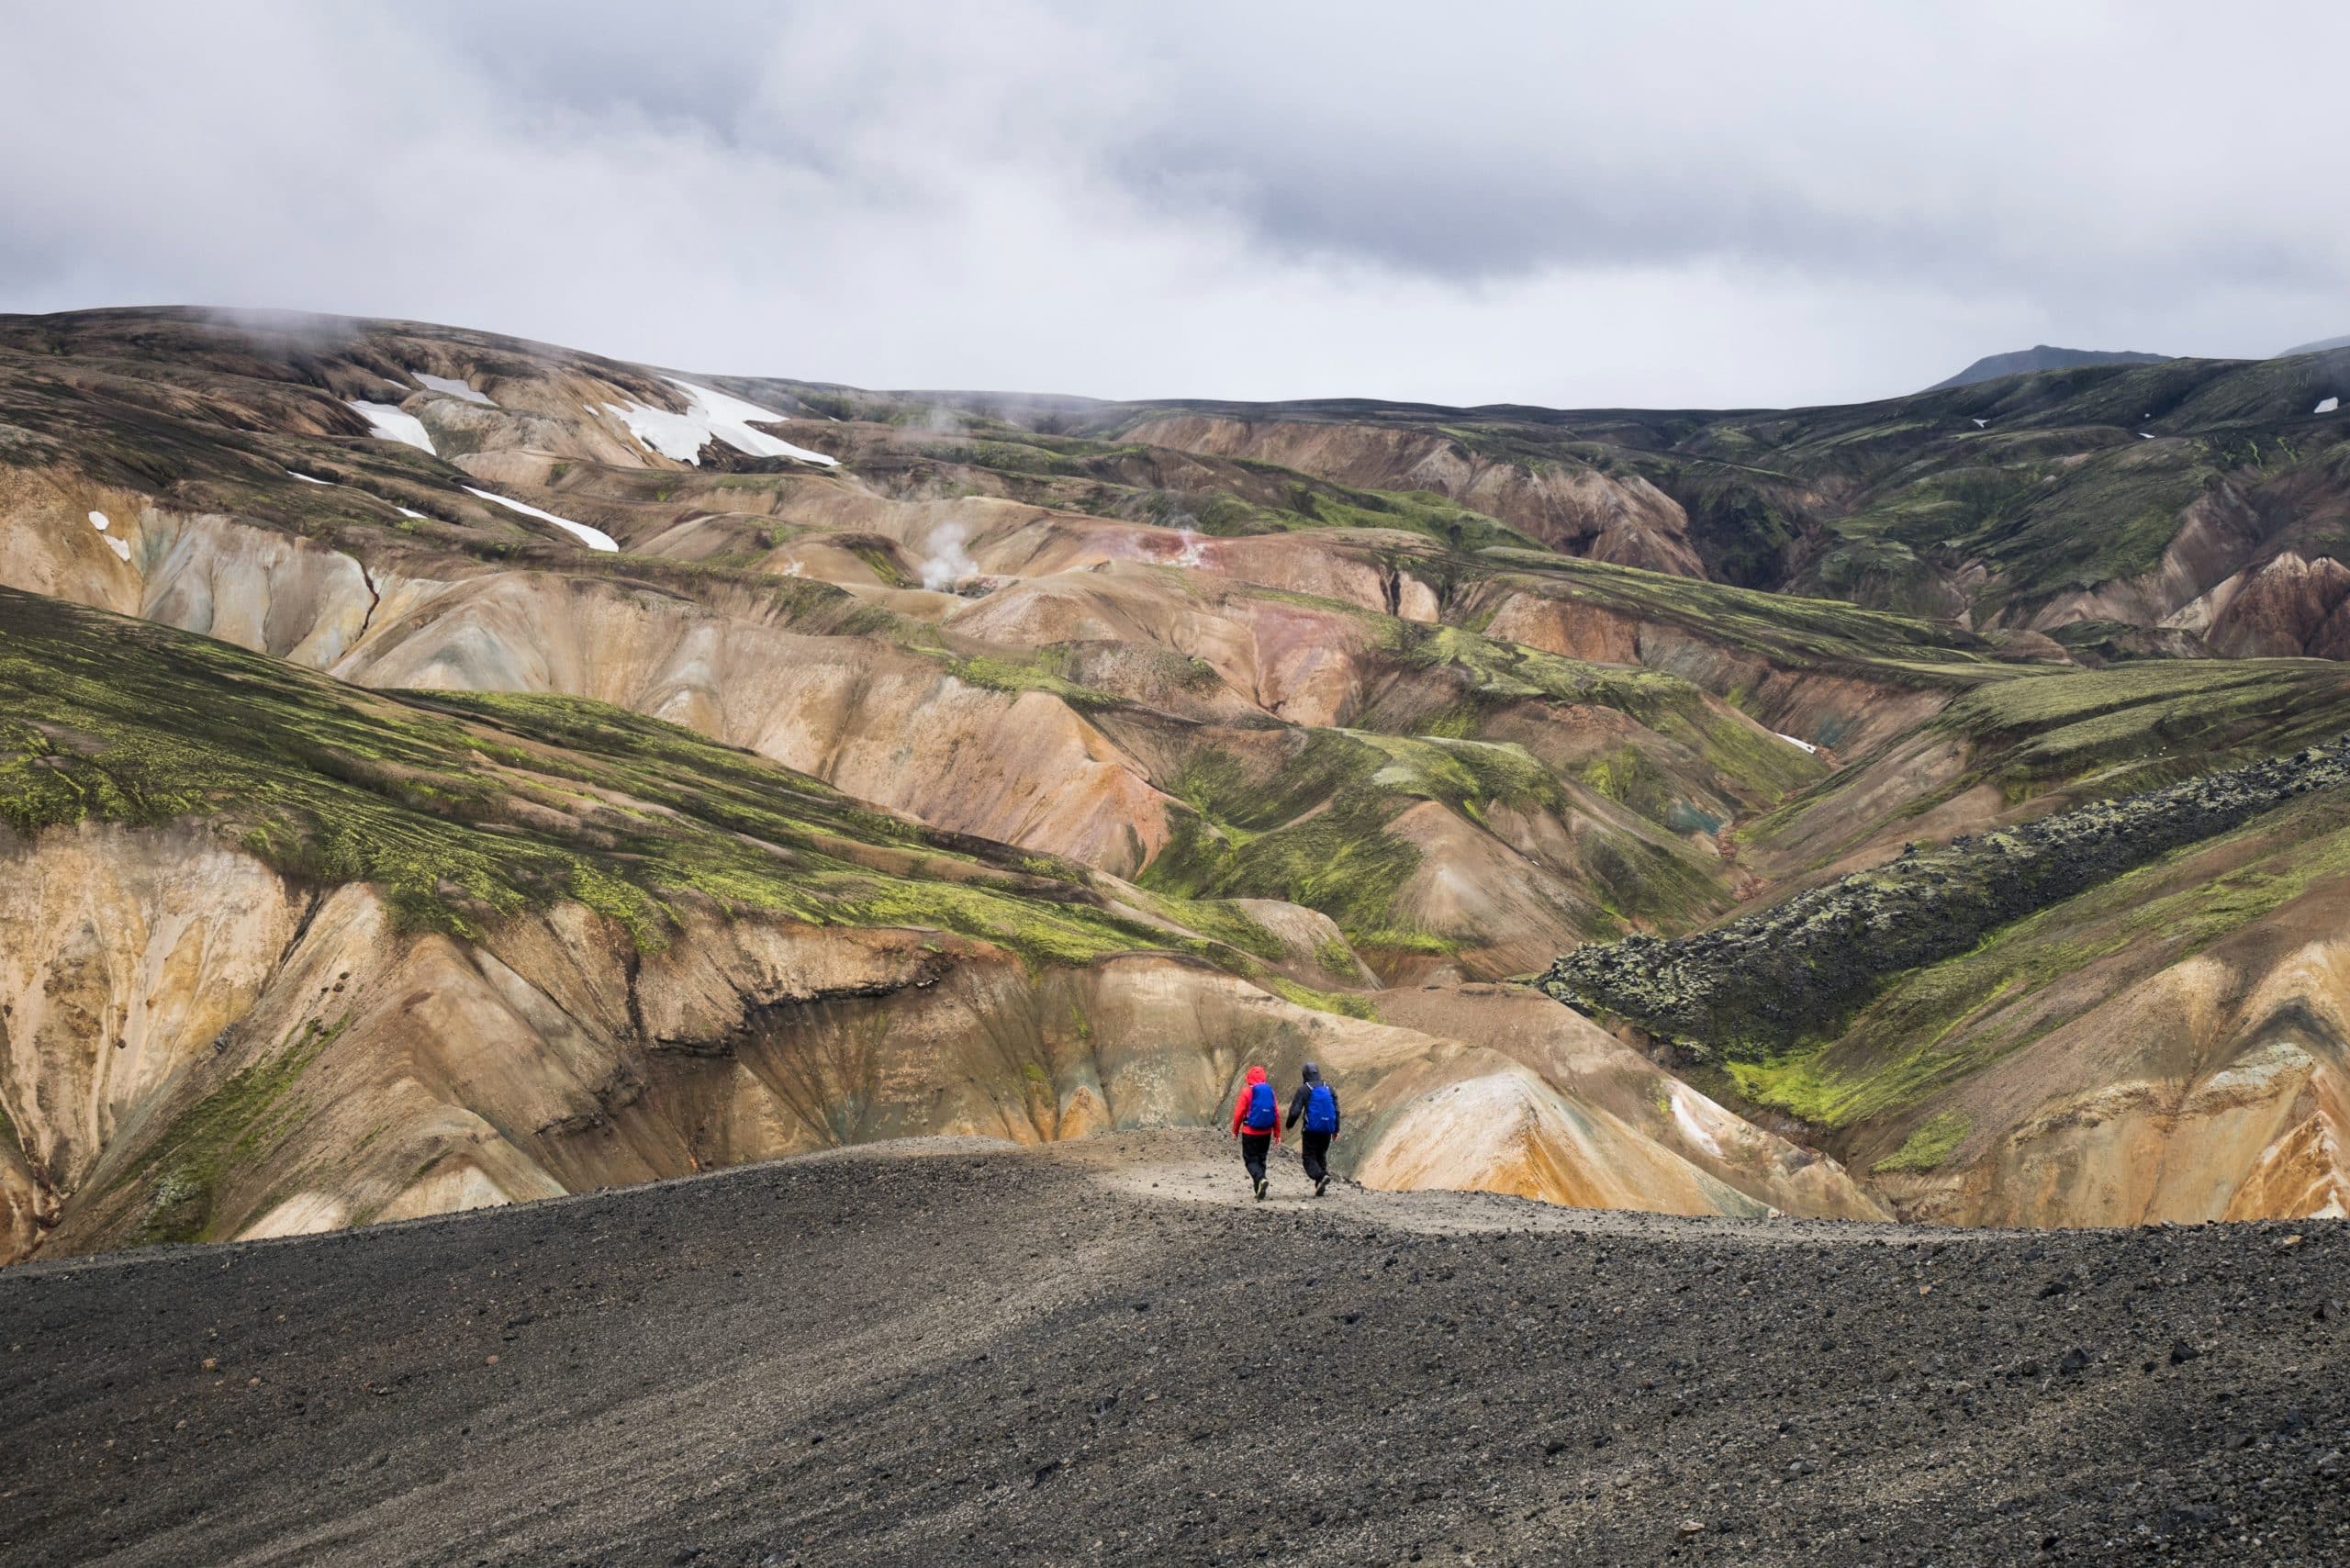 Two people hiking in the Landmannalaugar Region in Iceland's Highlands.